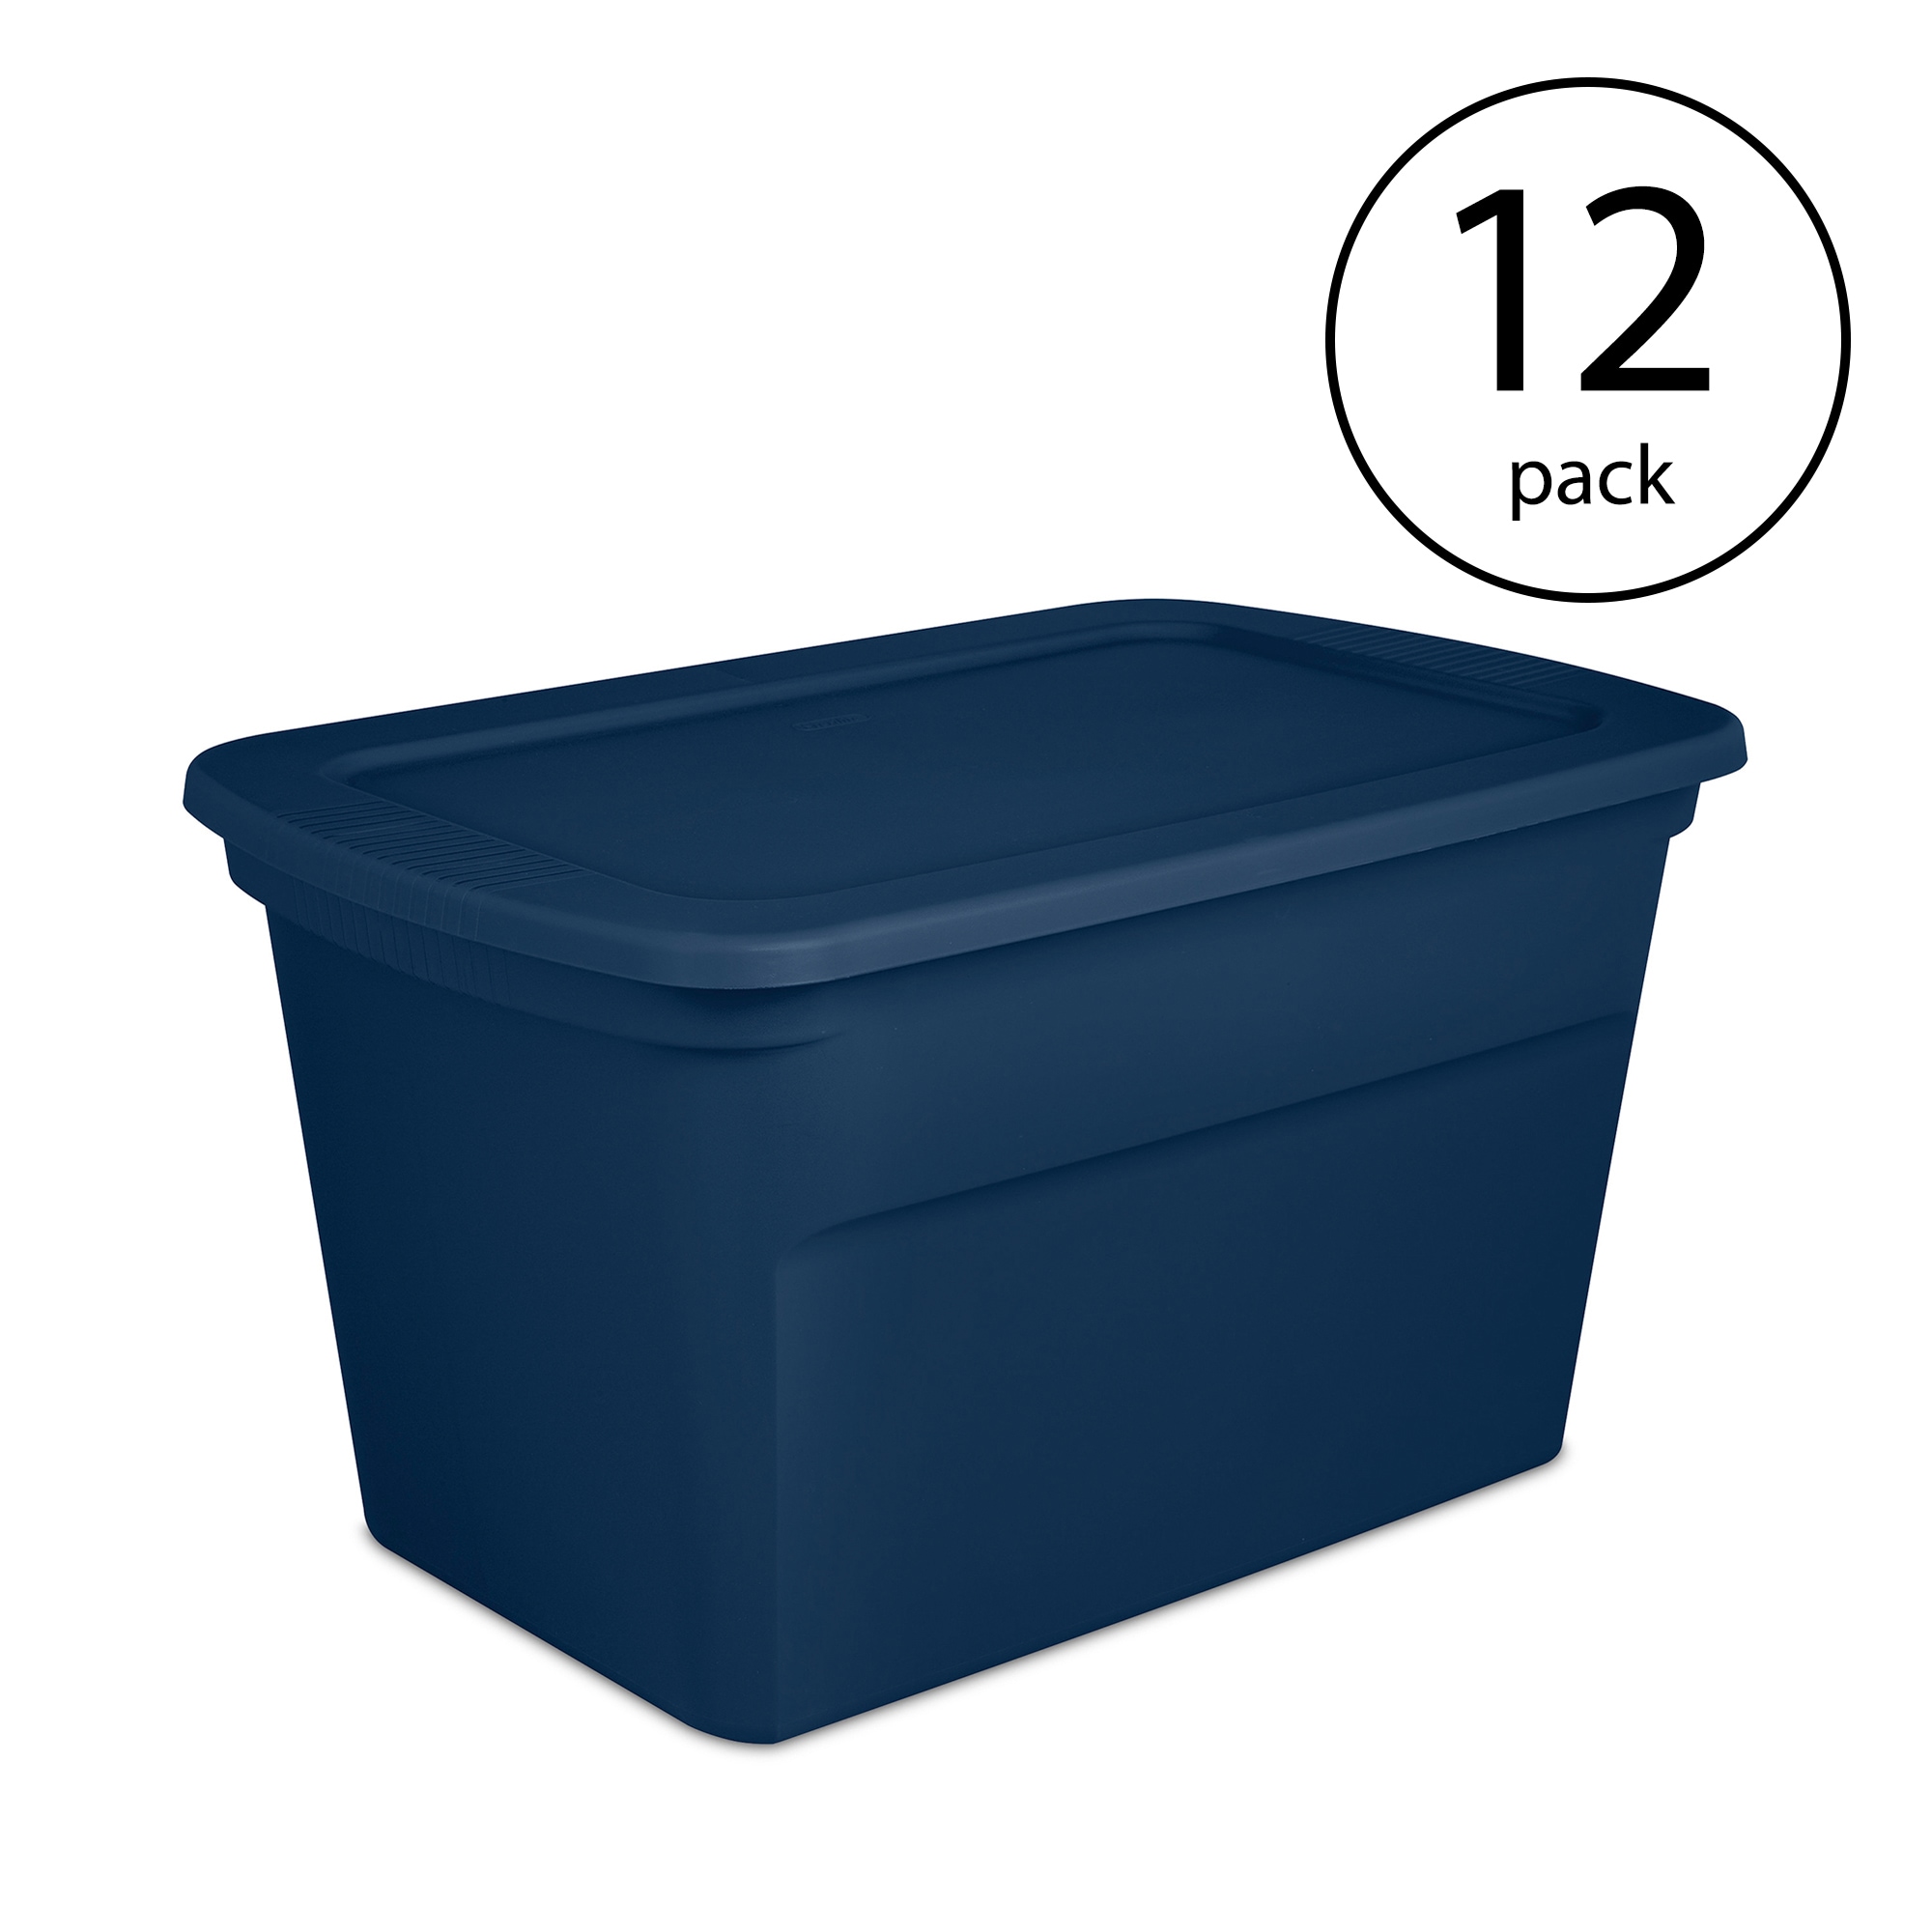 Sterilite 12-Pack Large 30-Gallons Blue Heavy Duty Tote with